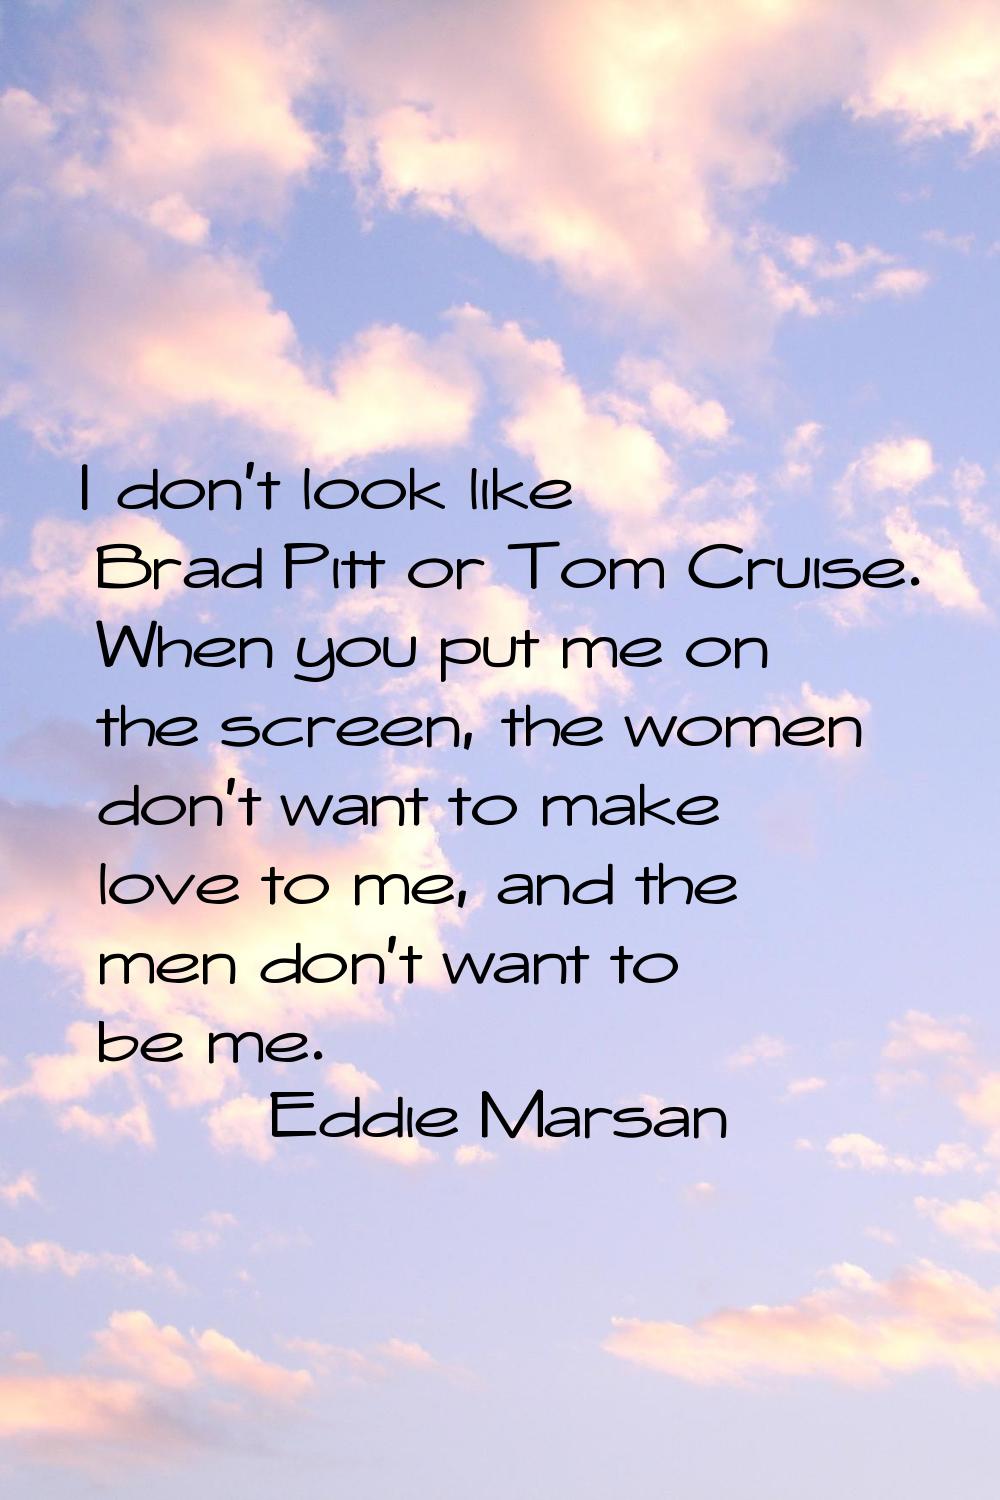 I don't look like Brad Pitt or Tom Cruise. When you put me on the screen, the women don't want to m